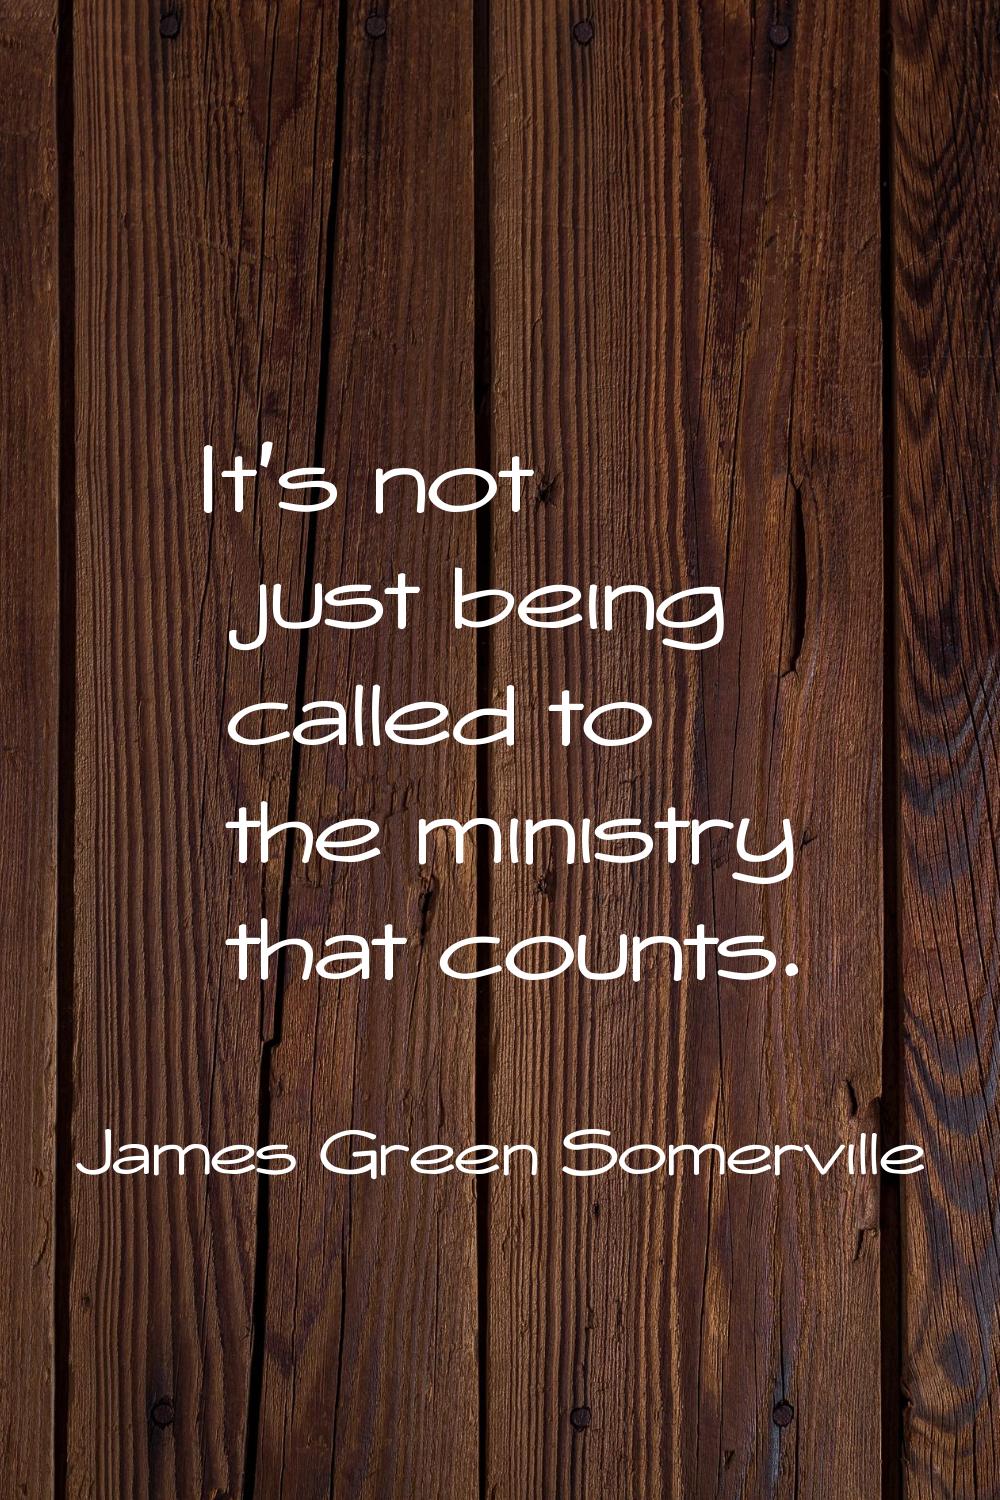 It's not just being called to the ministry that counts.